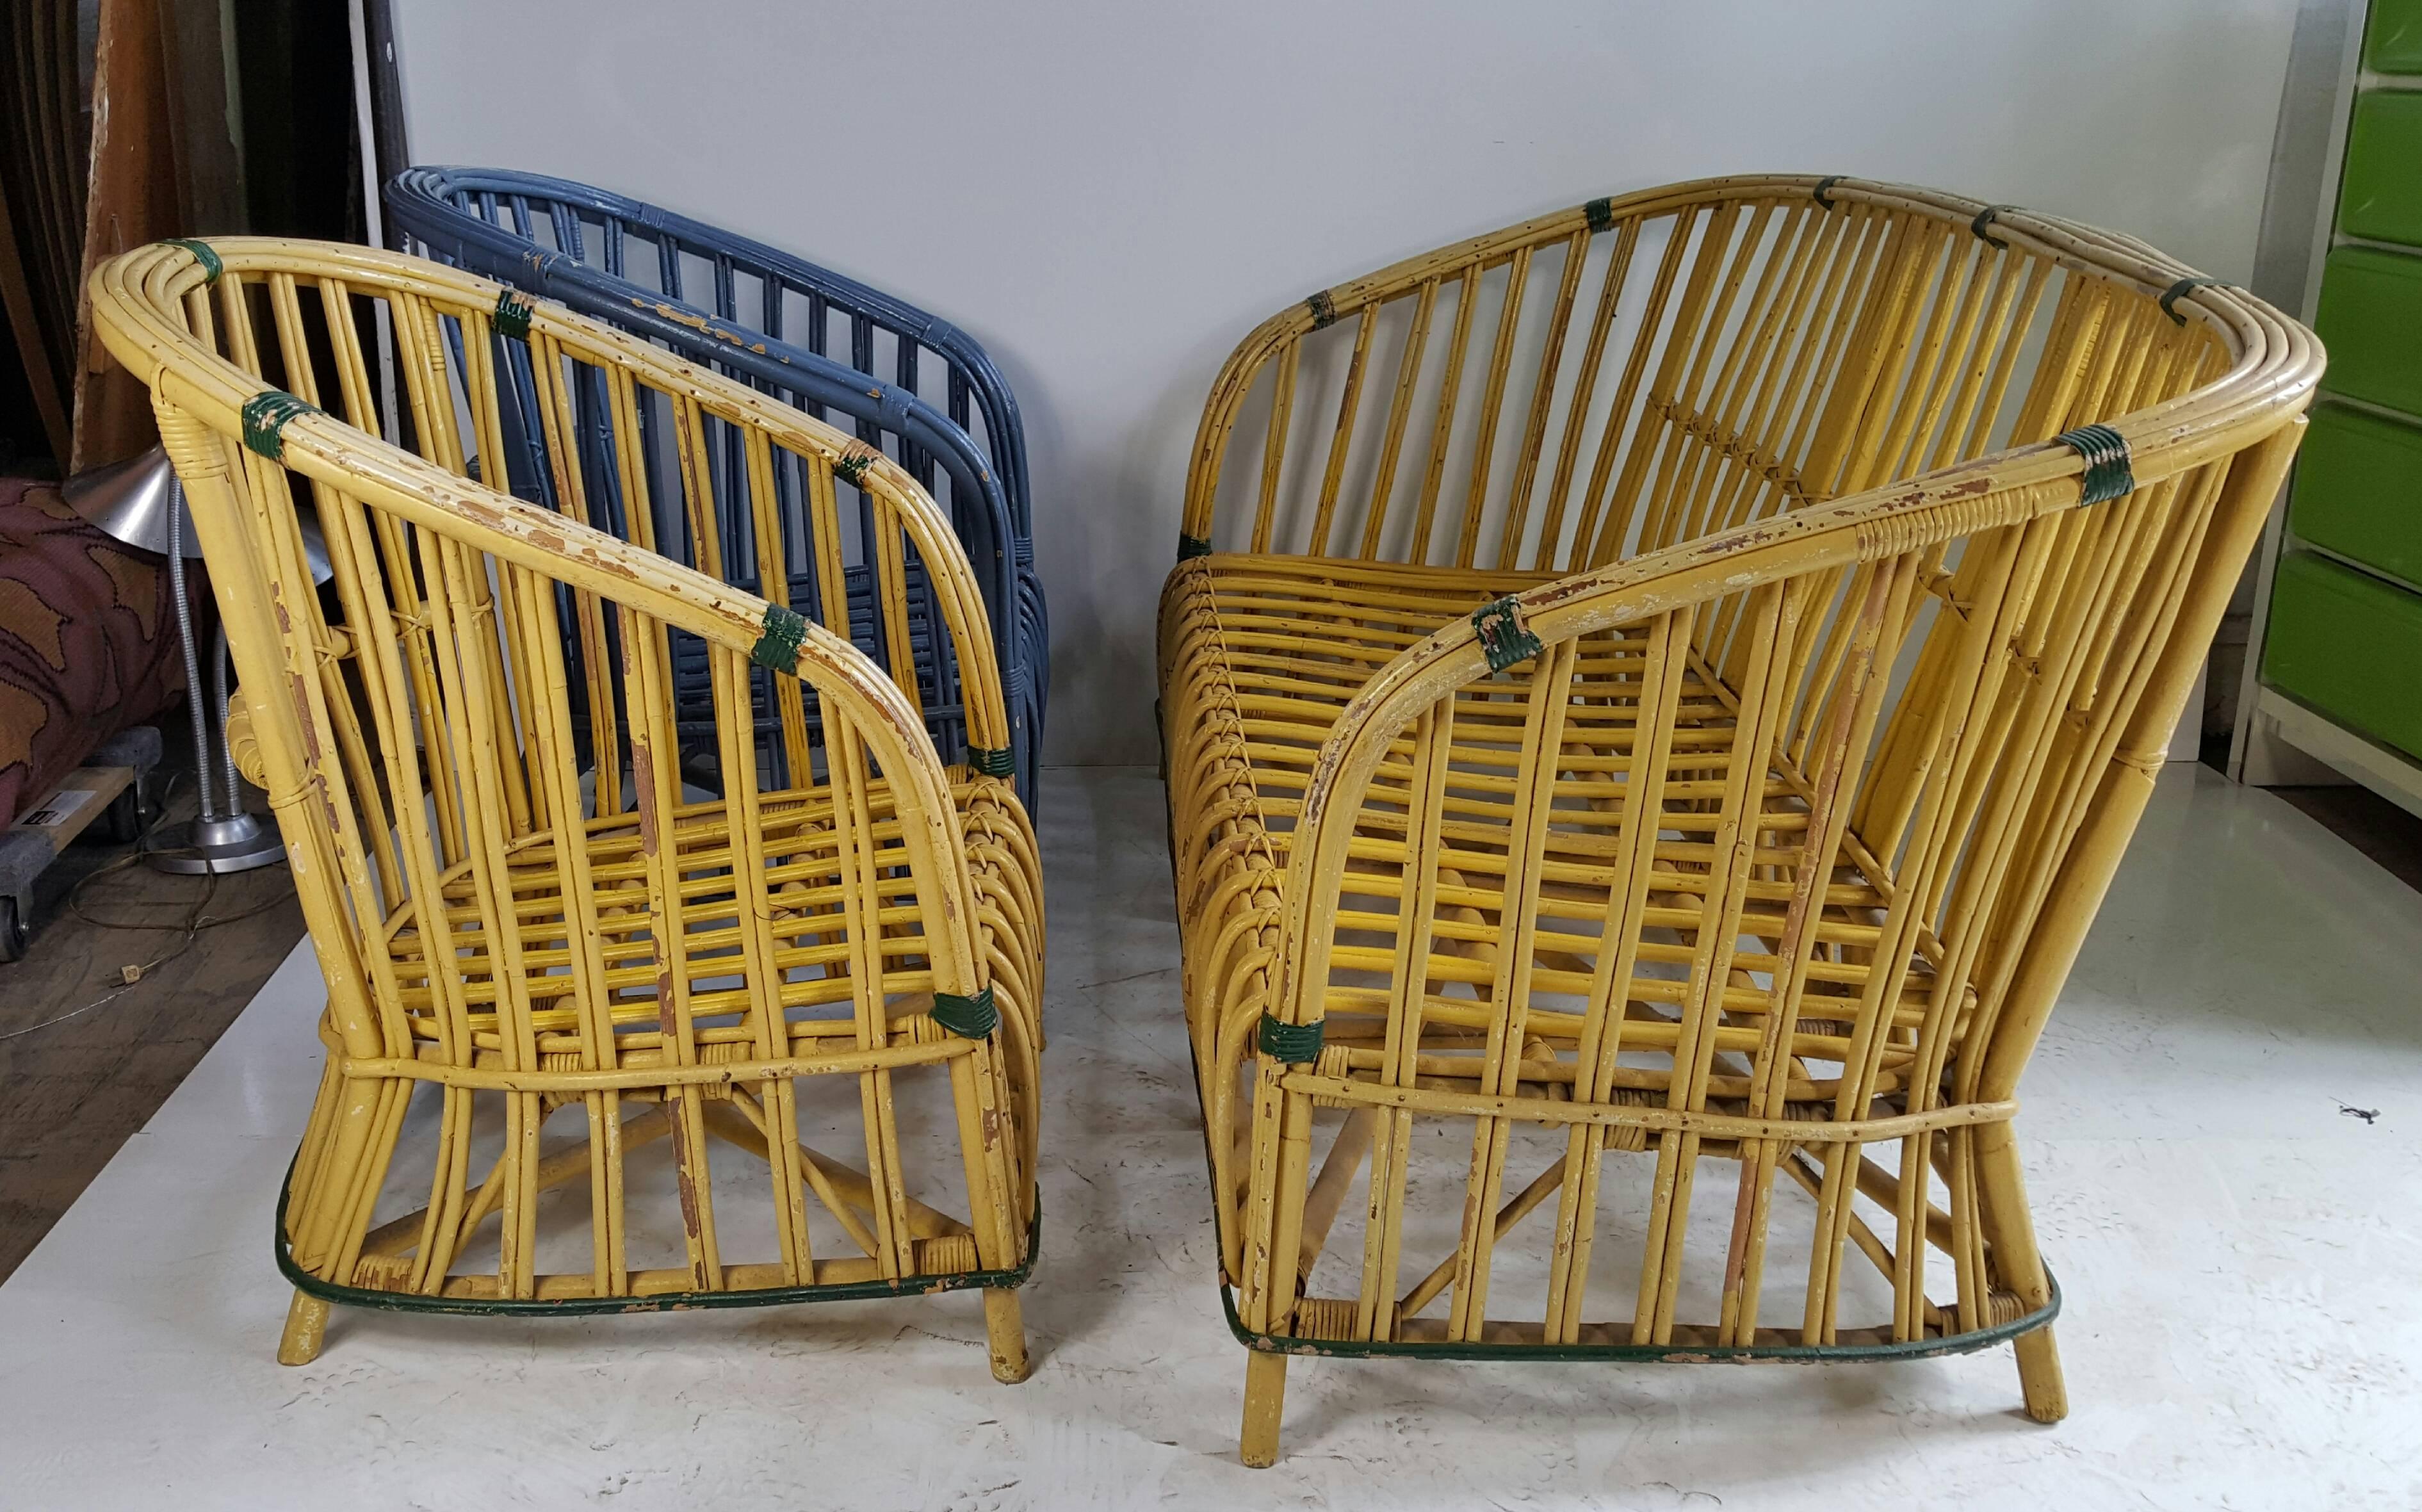 Three-piece Art Deco stick wicker / split reed. Set consists of three-seat sofa and two matching club chairs, wonderful design, yellow sofa and chair appear to be original paint, one matching chair re-painted in blue.